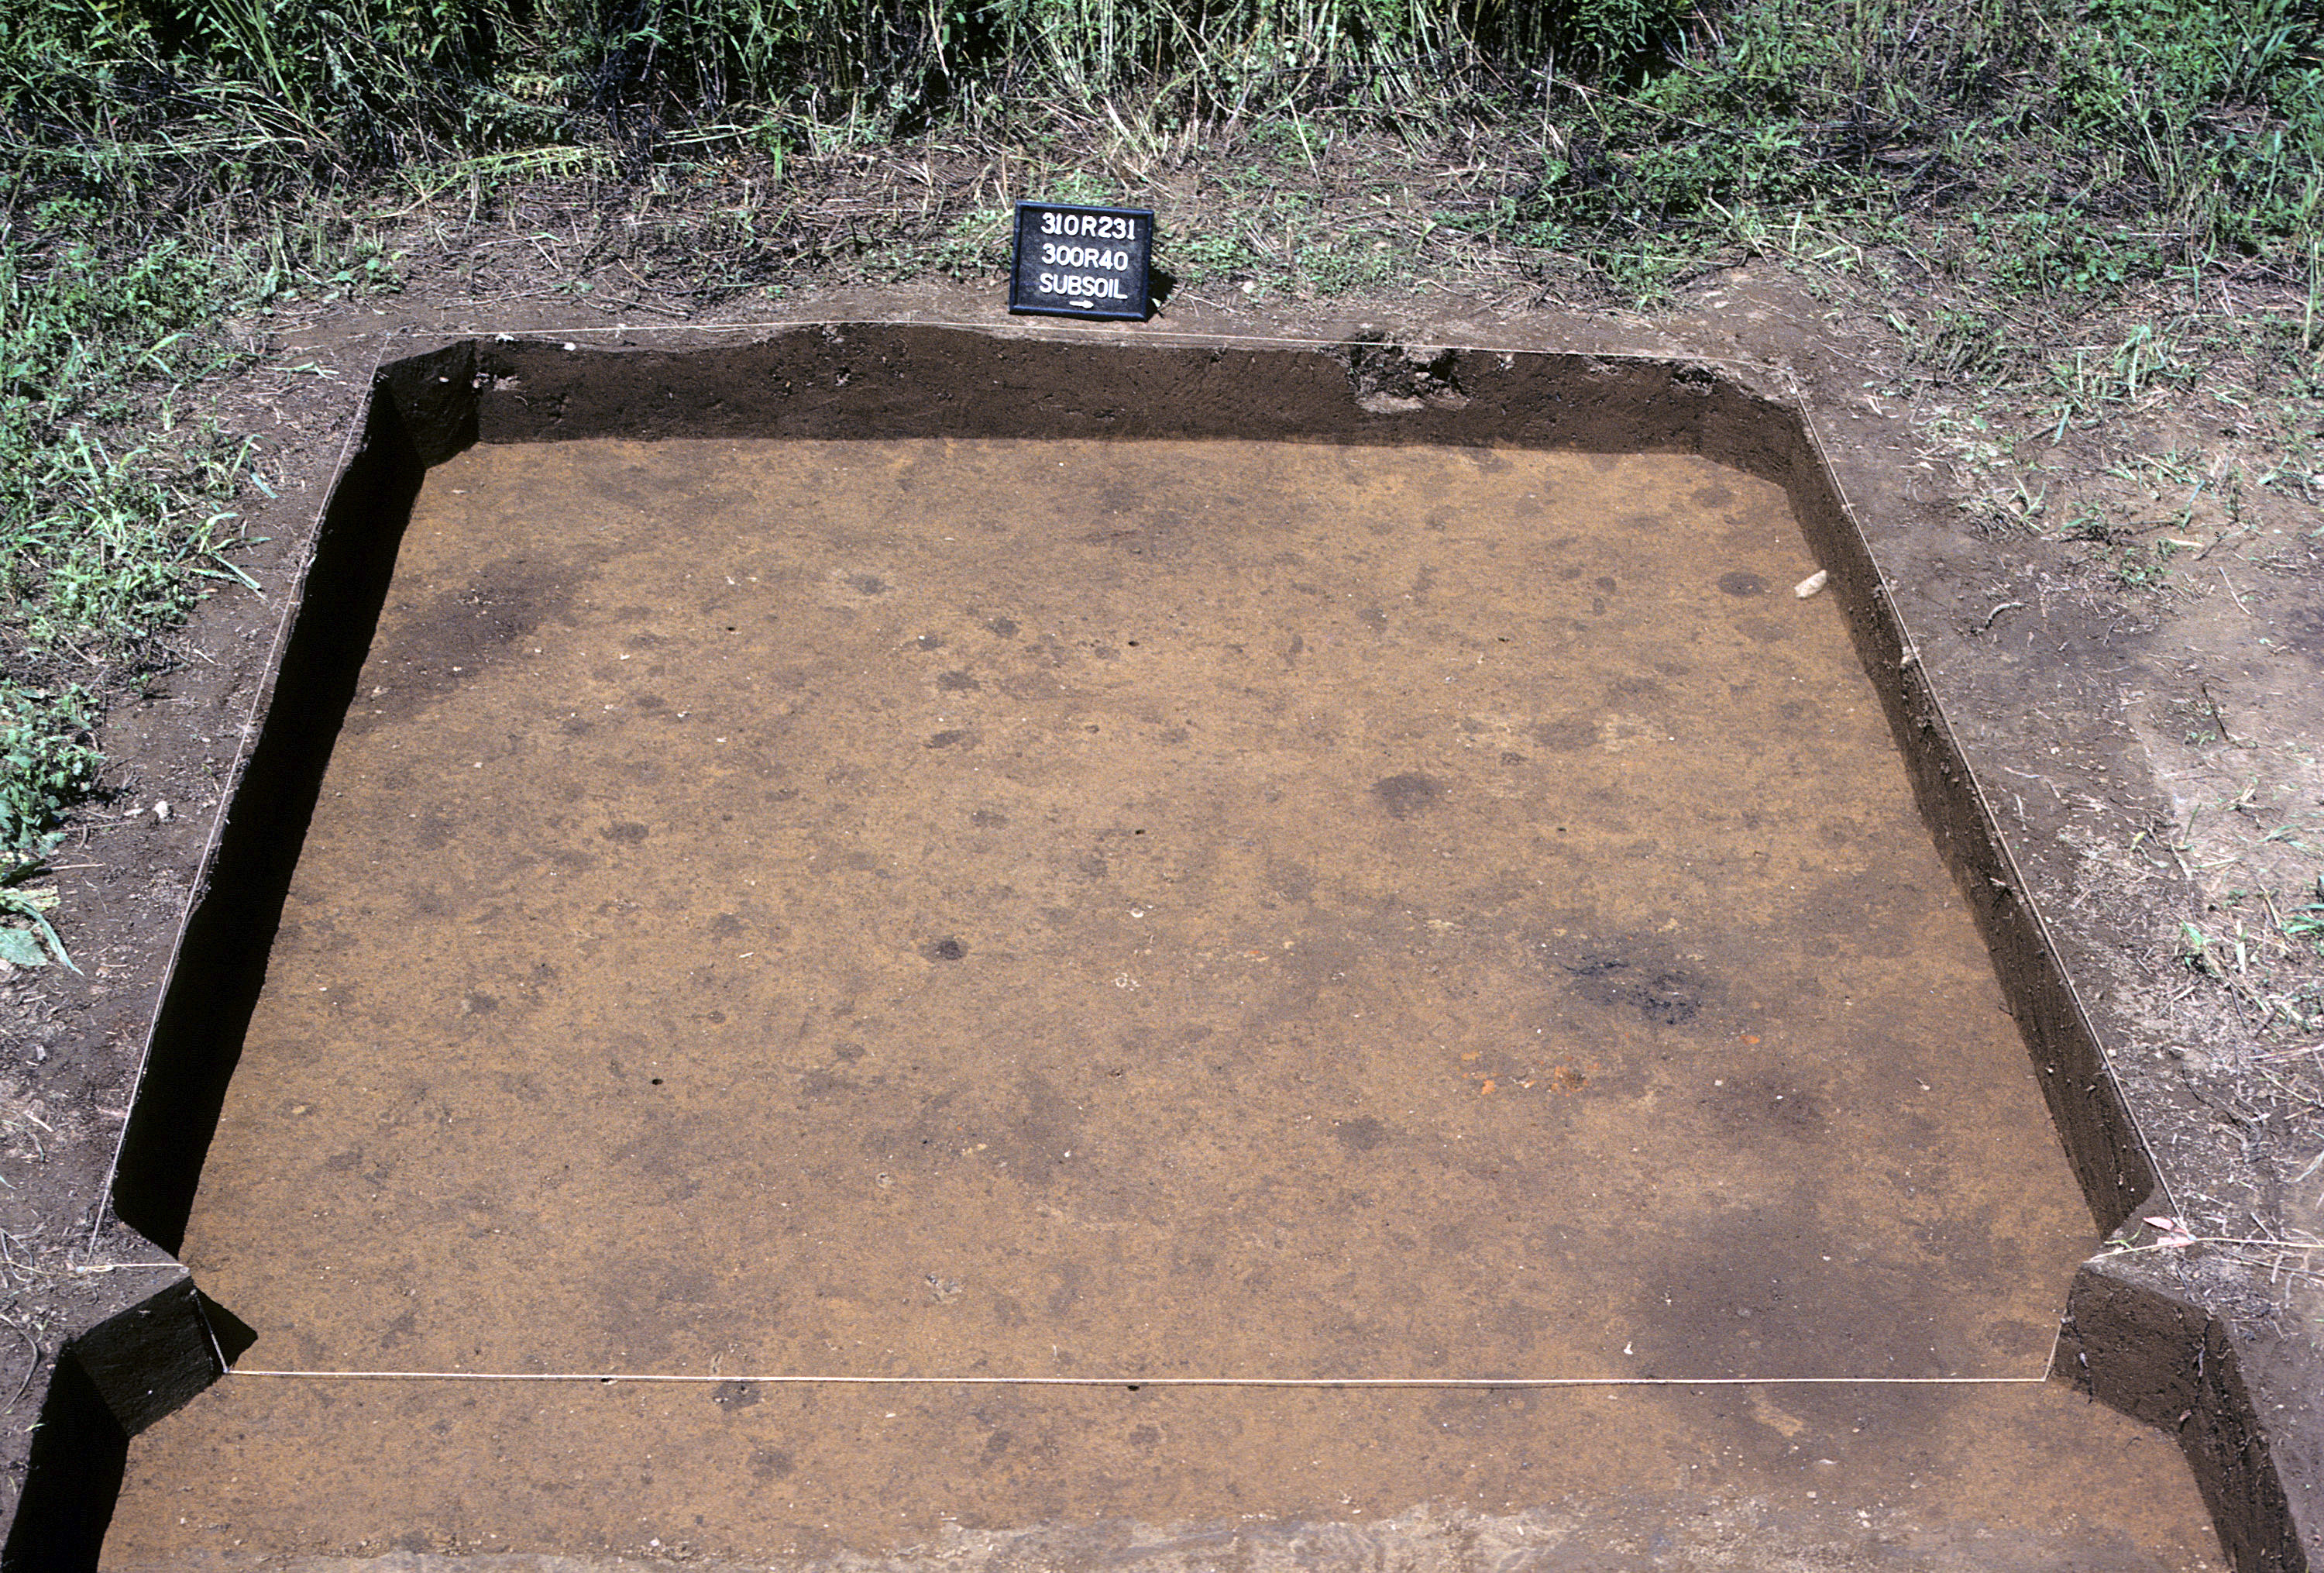 Figure 999. Sq. 300R40 at top of subsoil (view to west).